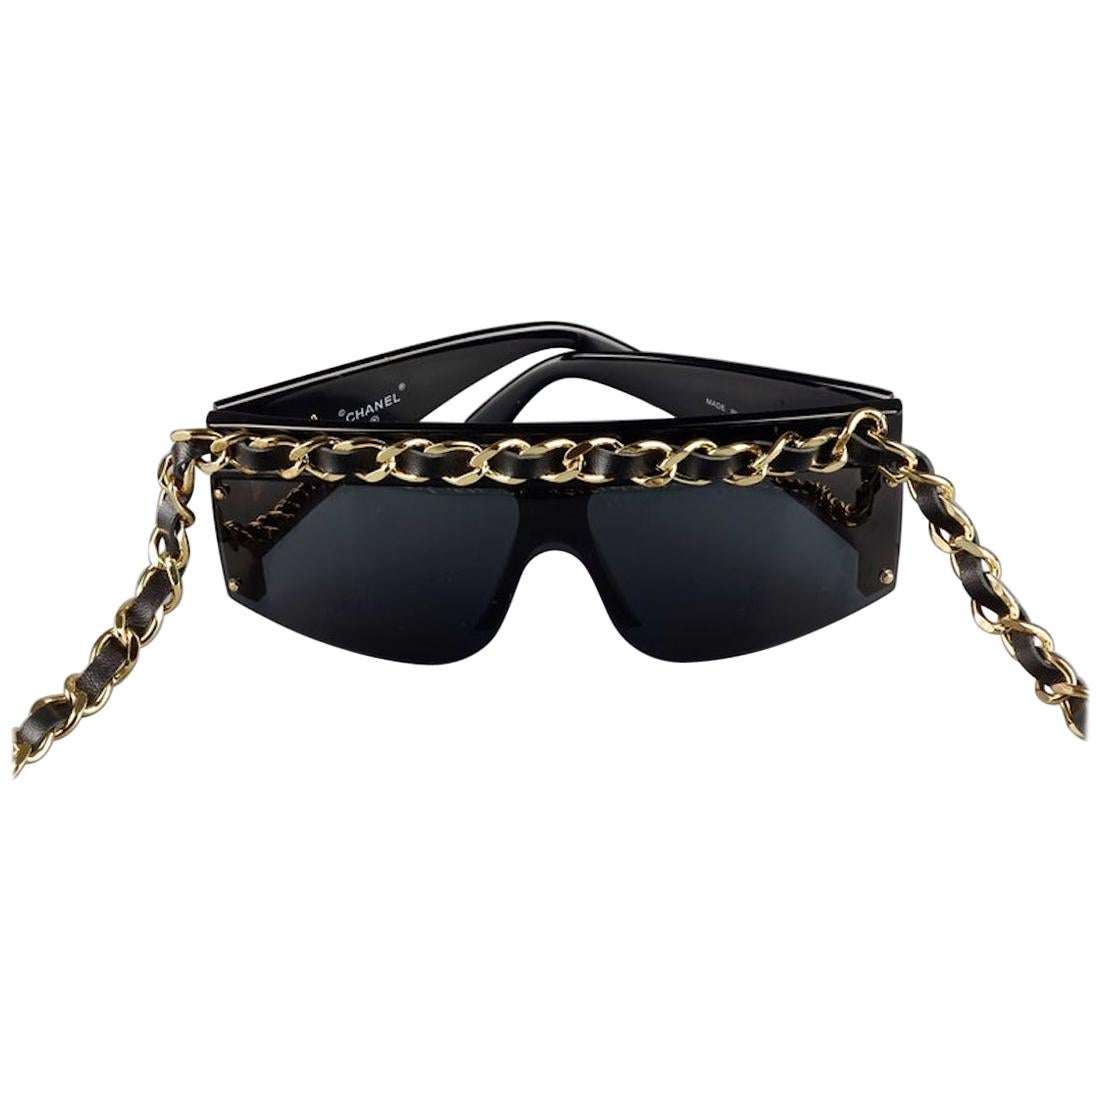 Vintage 1992 CHANEL Iconic Leather Chain Drop Sunglasses